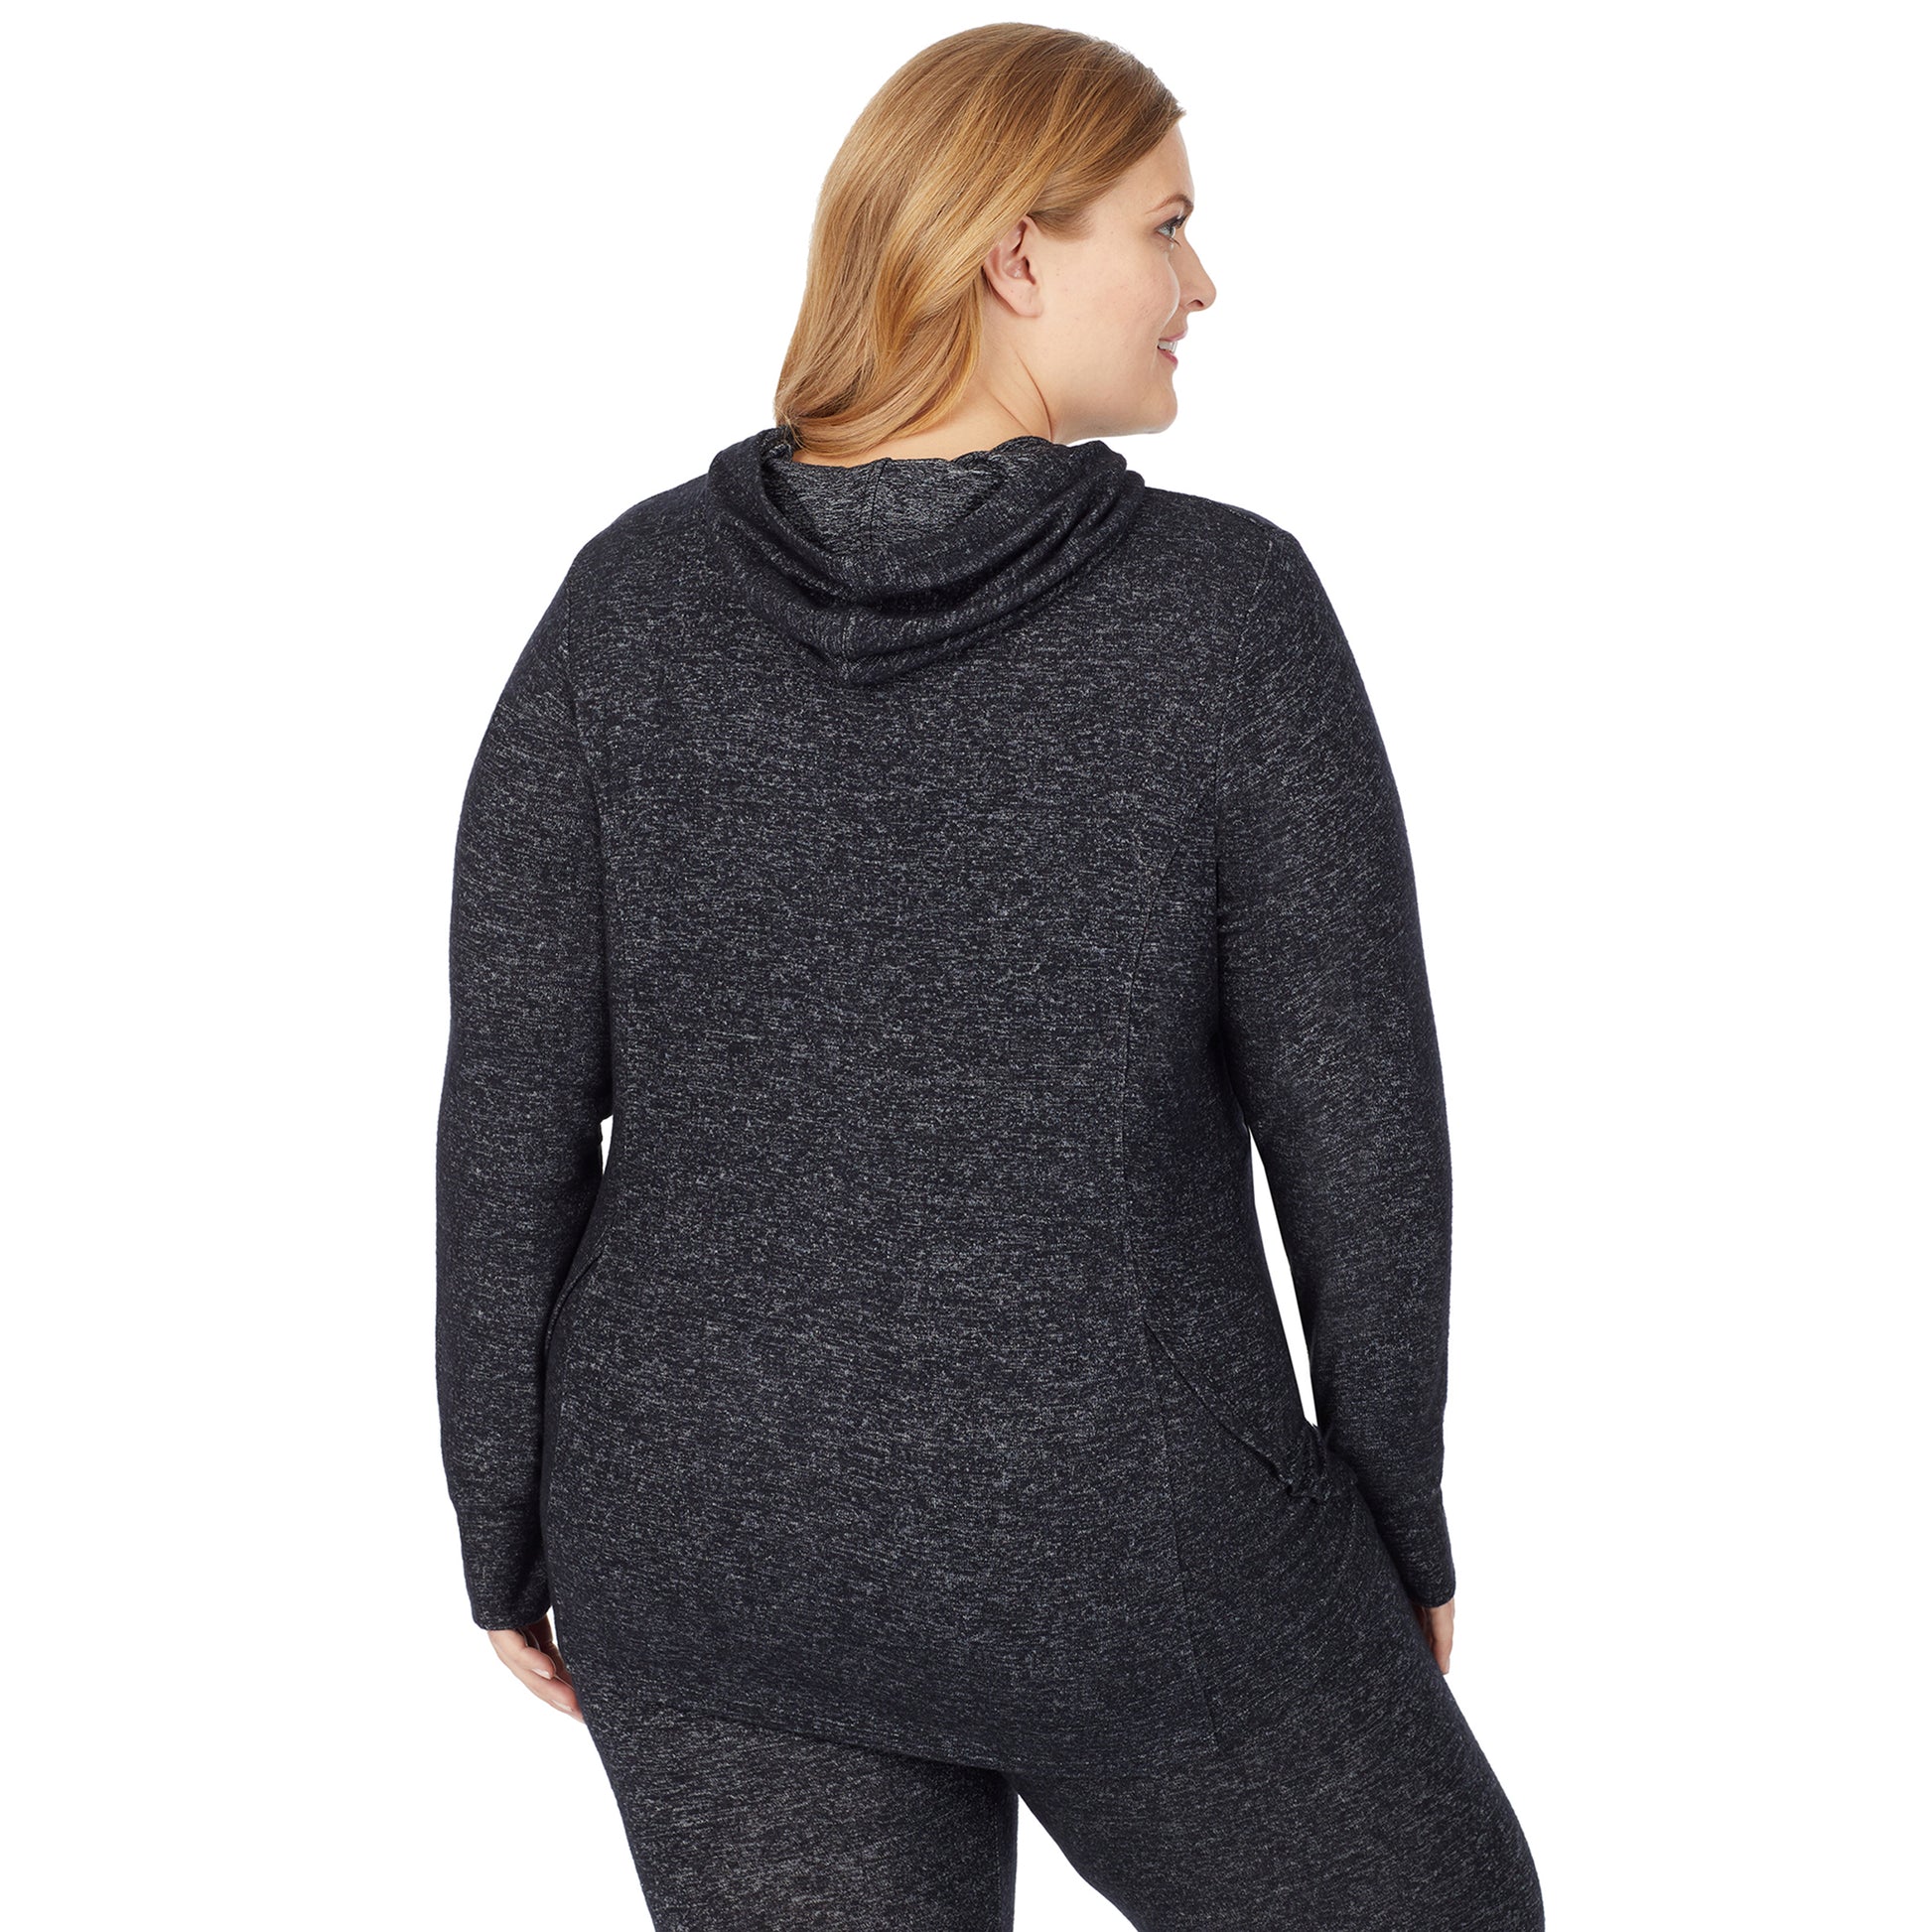 Marled Dark Charcoal; Model is wearing size 1X. She is 5'9", Bust 38", Waist 36", Hips 48.5". @A lady wearing a marled dark charcoal long sleeve tunic hoodie plus.